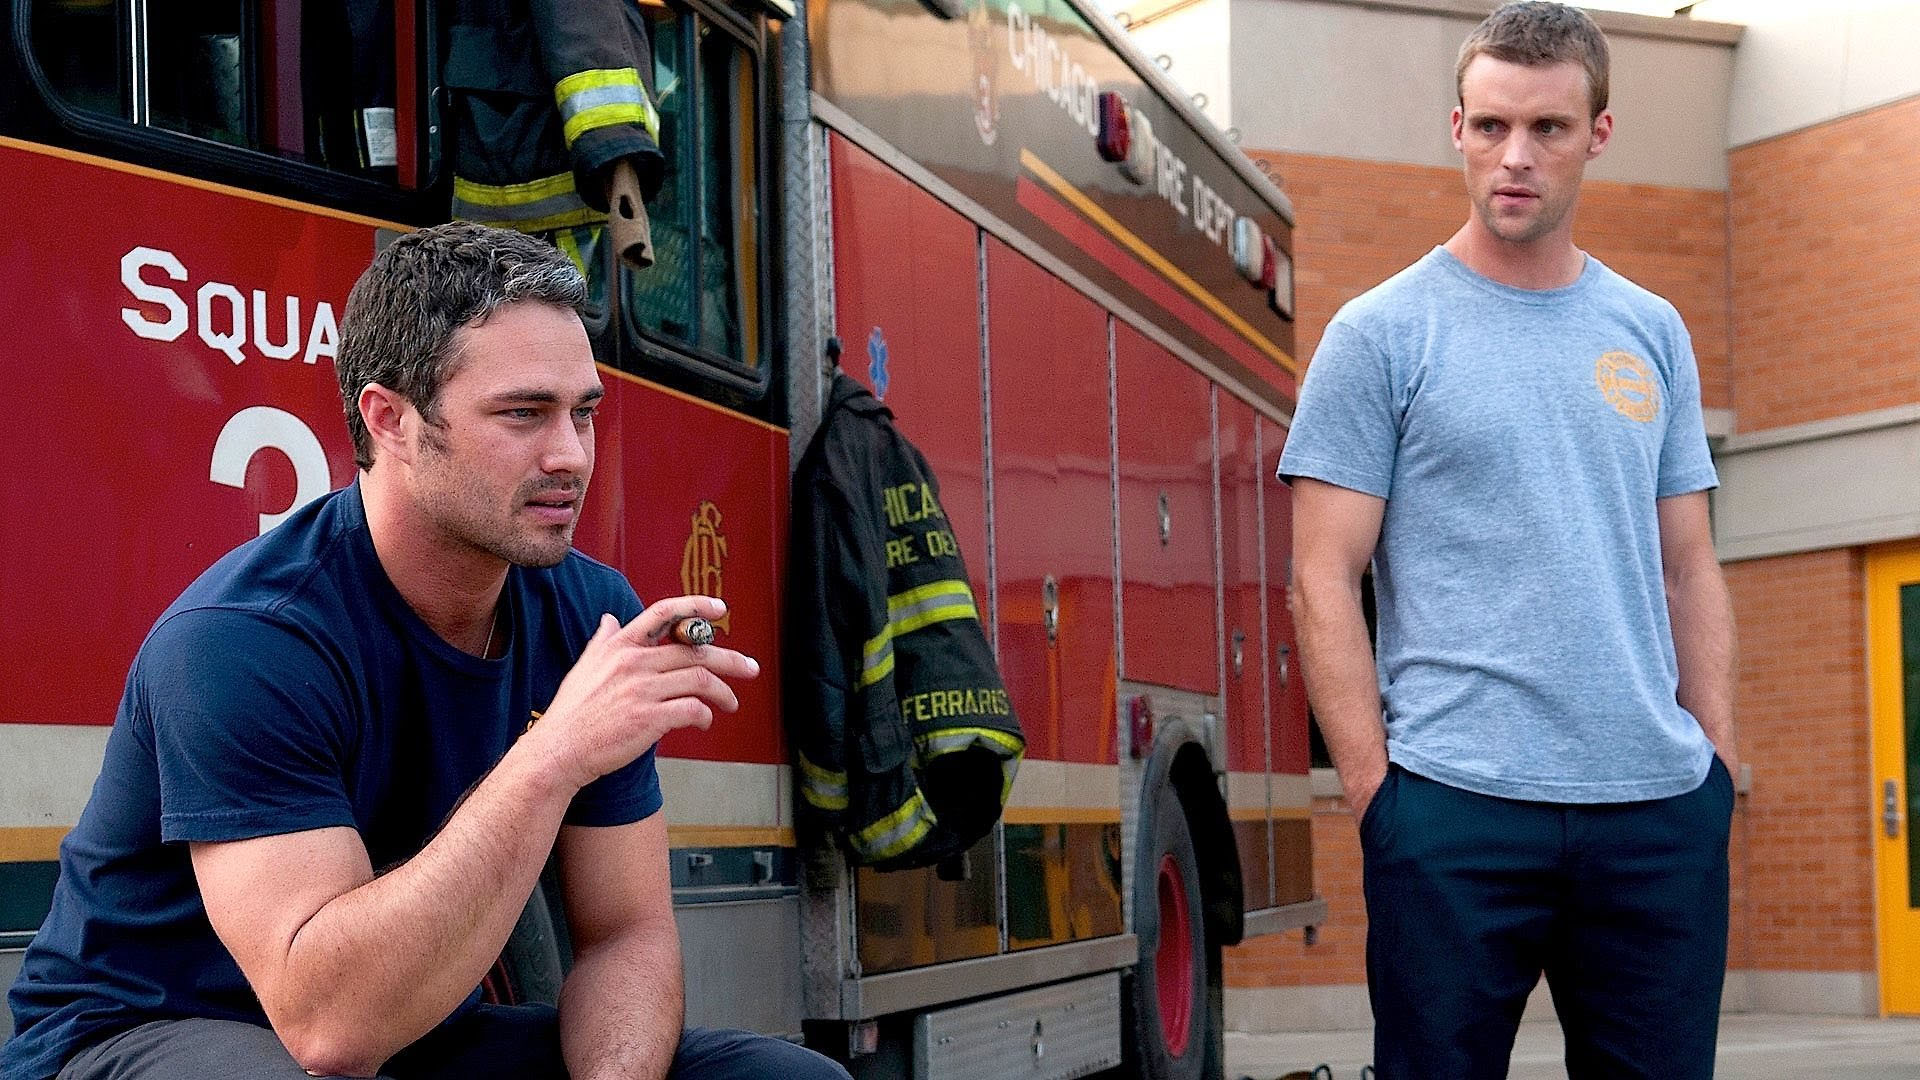 Chicago Fire Wallpapers